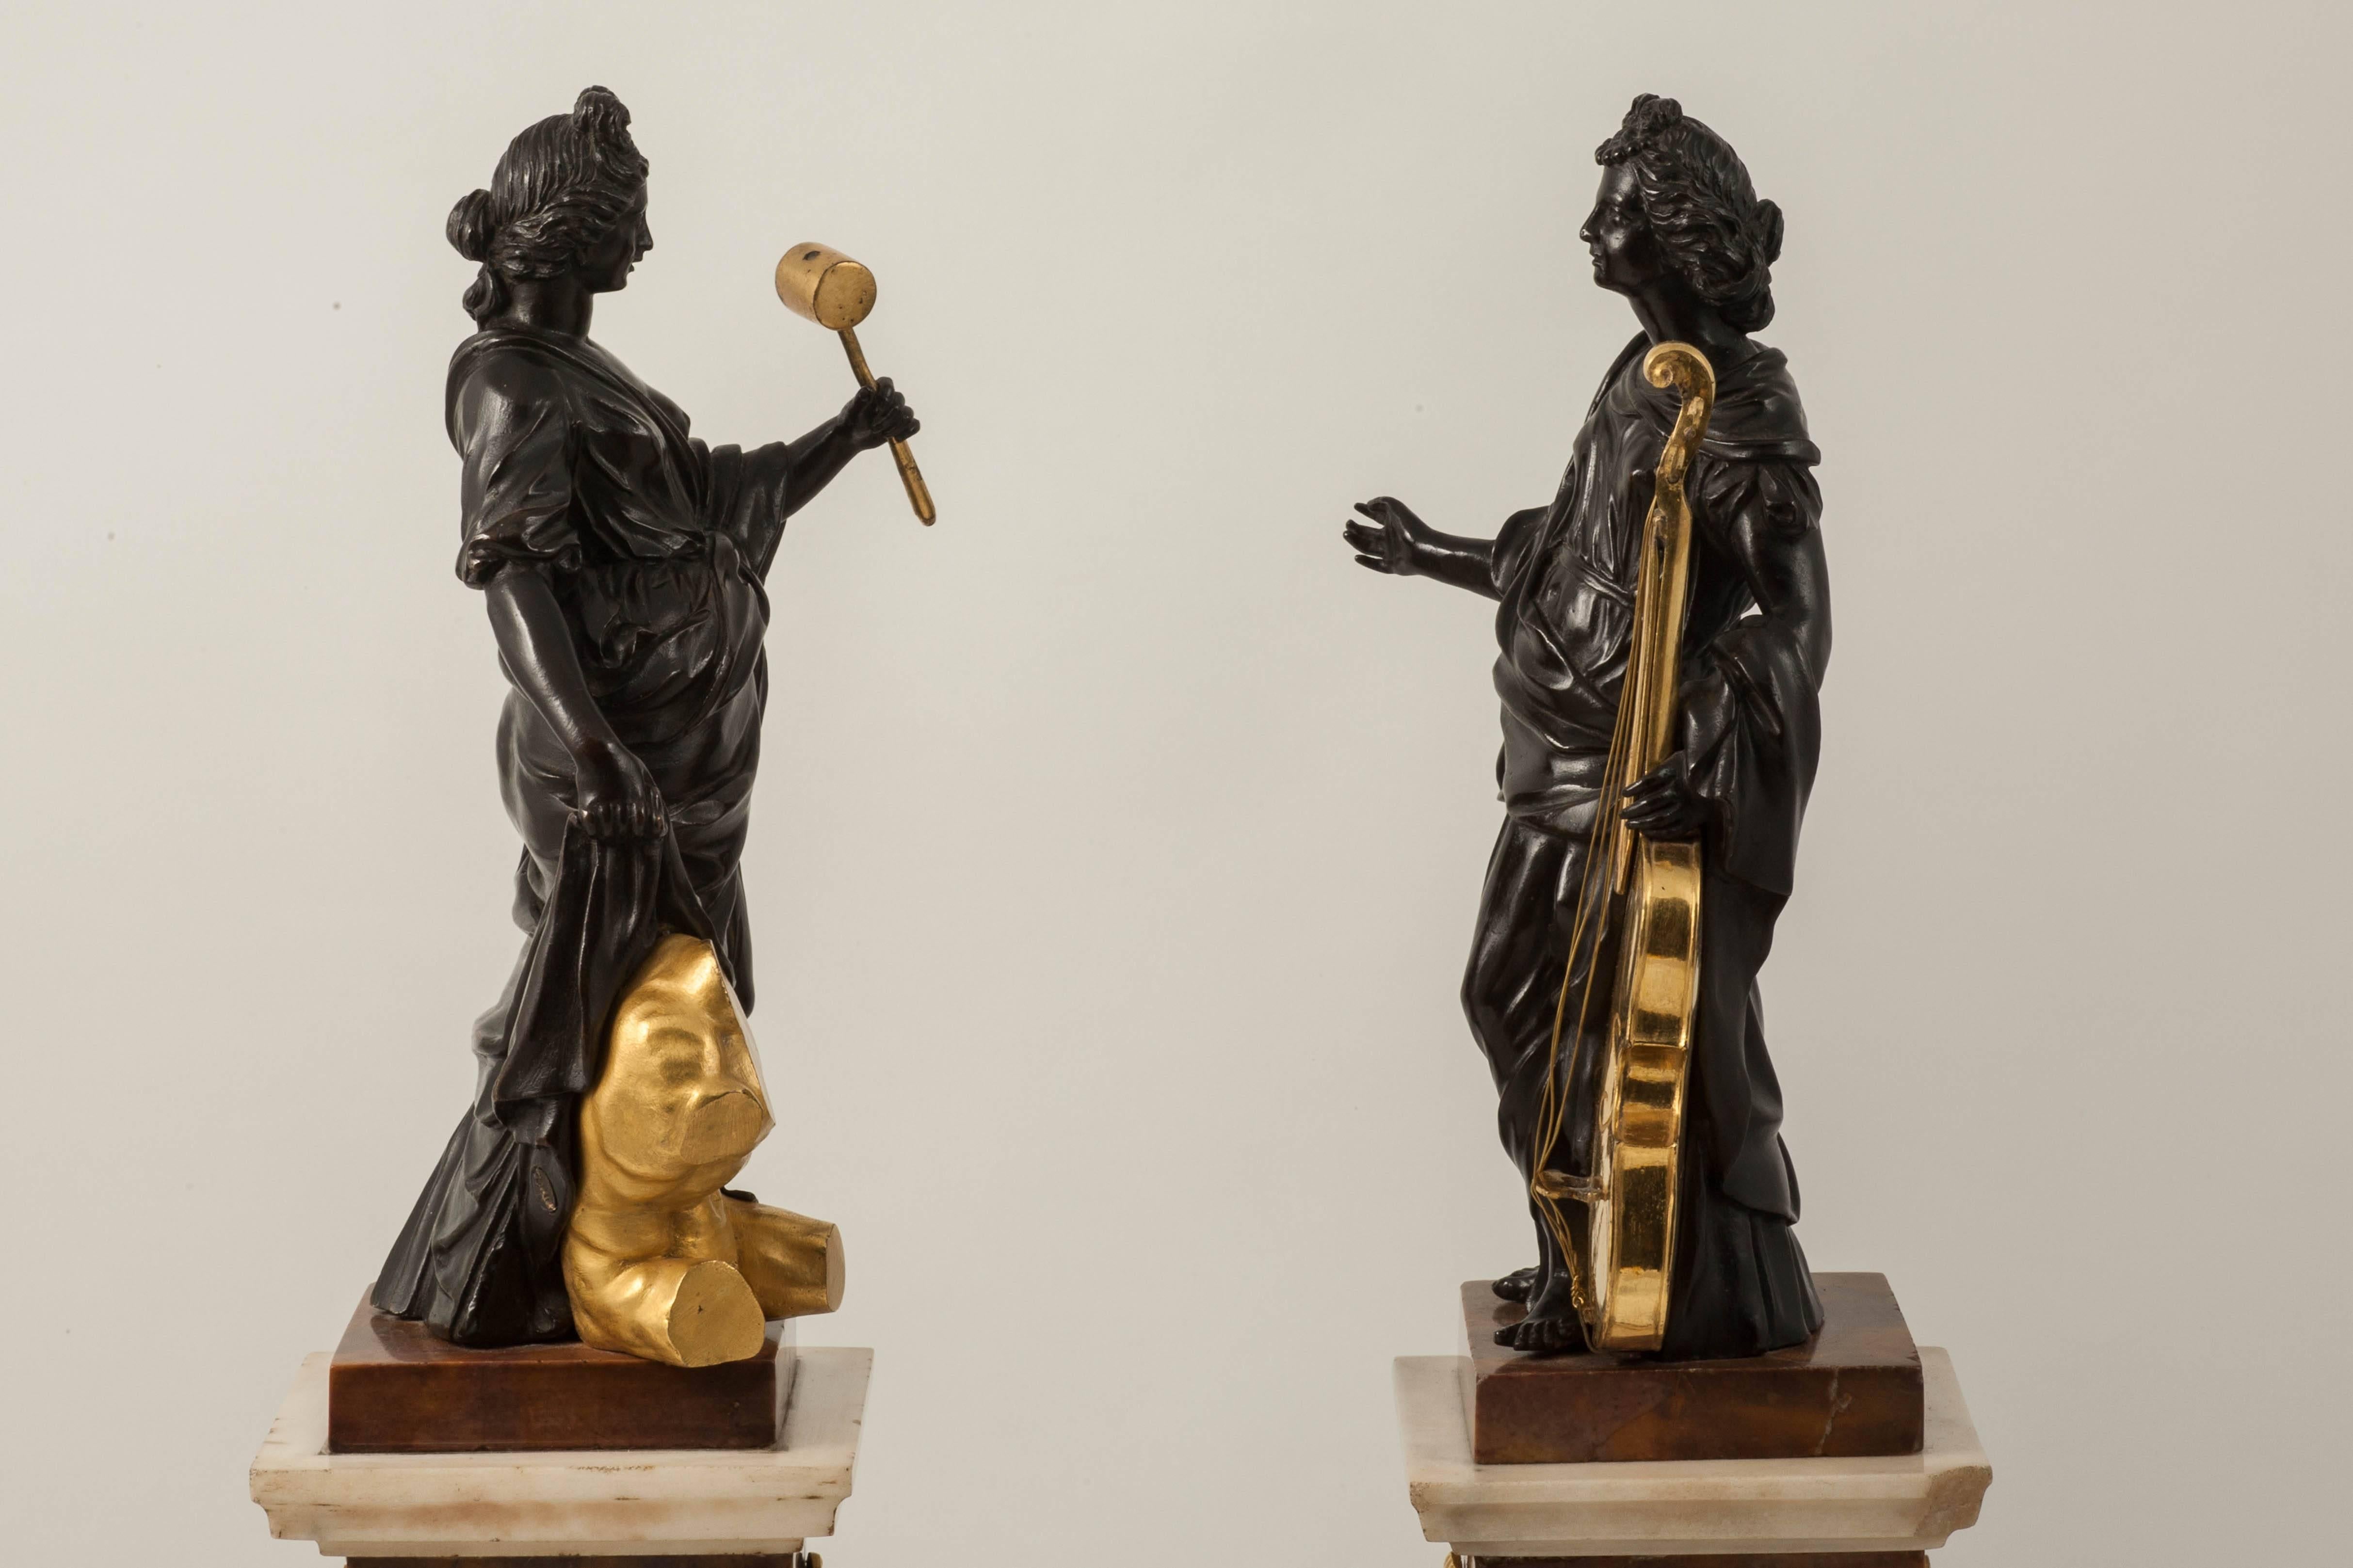 Rare Pair of Allegorical Bronze Figures Attributed to Valadier, Rome, circa 1780 For Sale 2